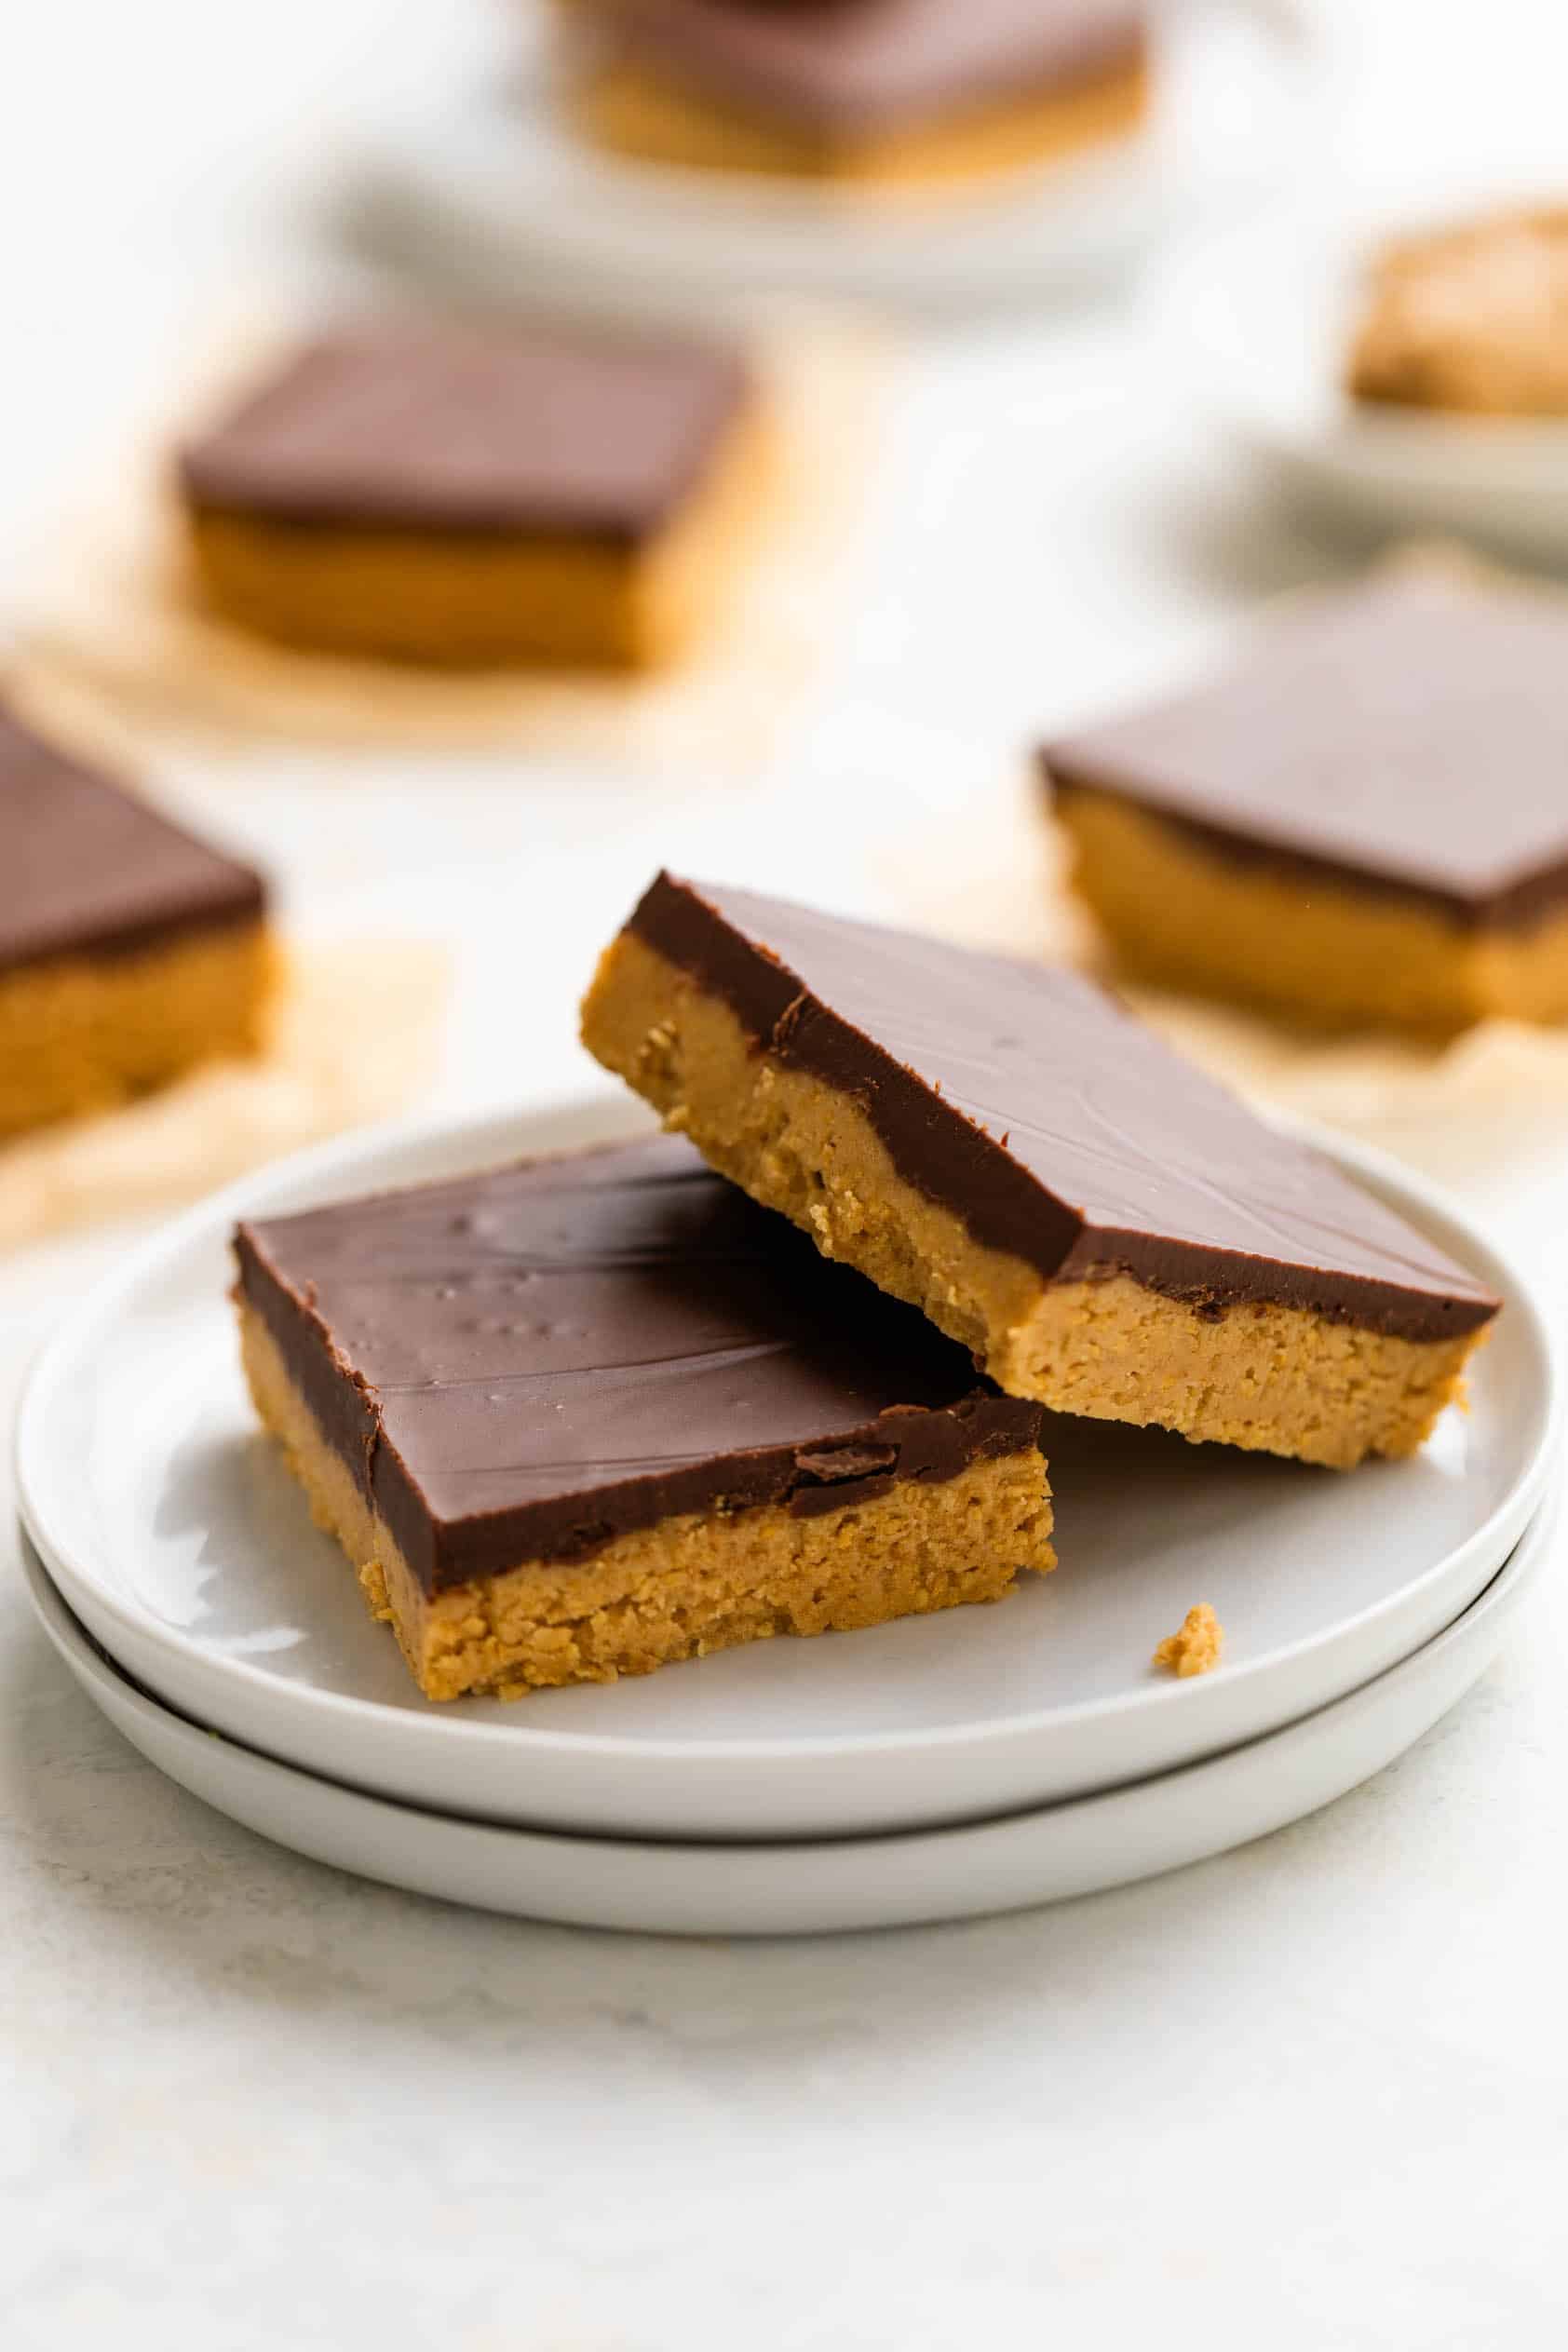 Two peanut butter chocolate bars on a stack of plates.